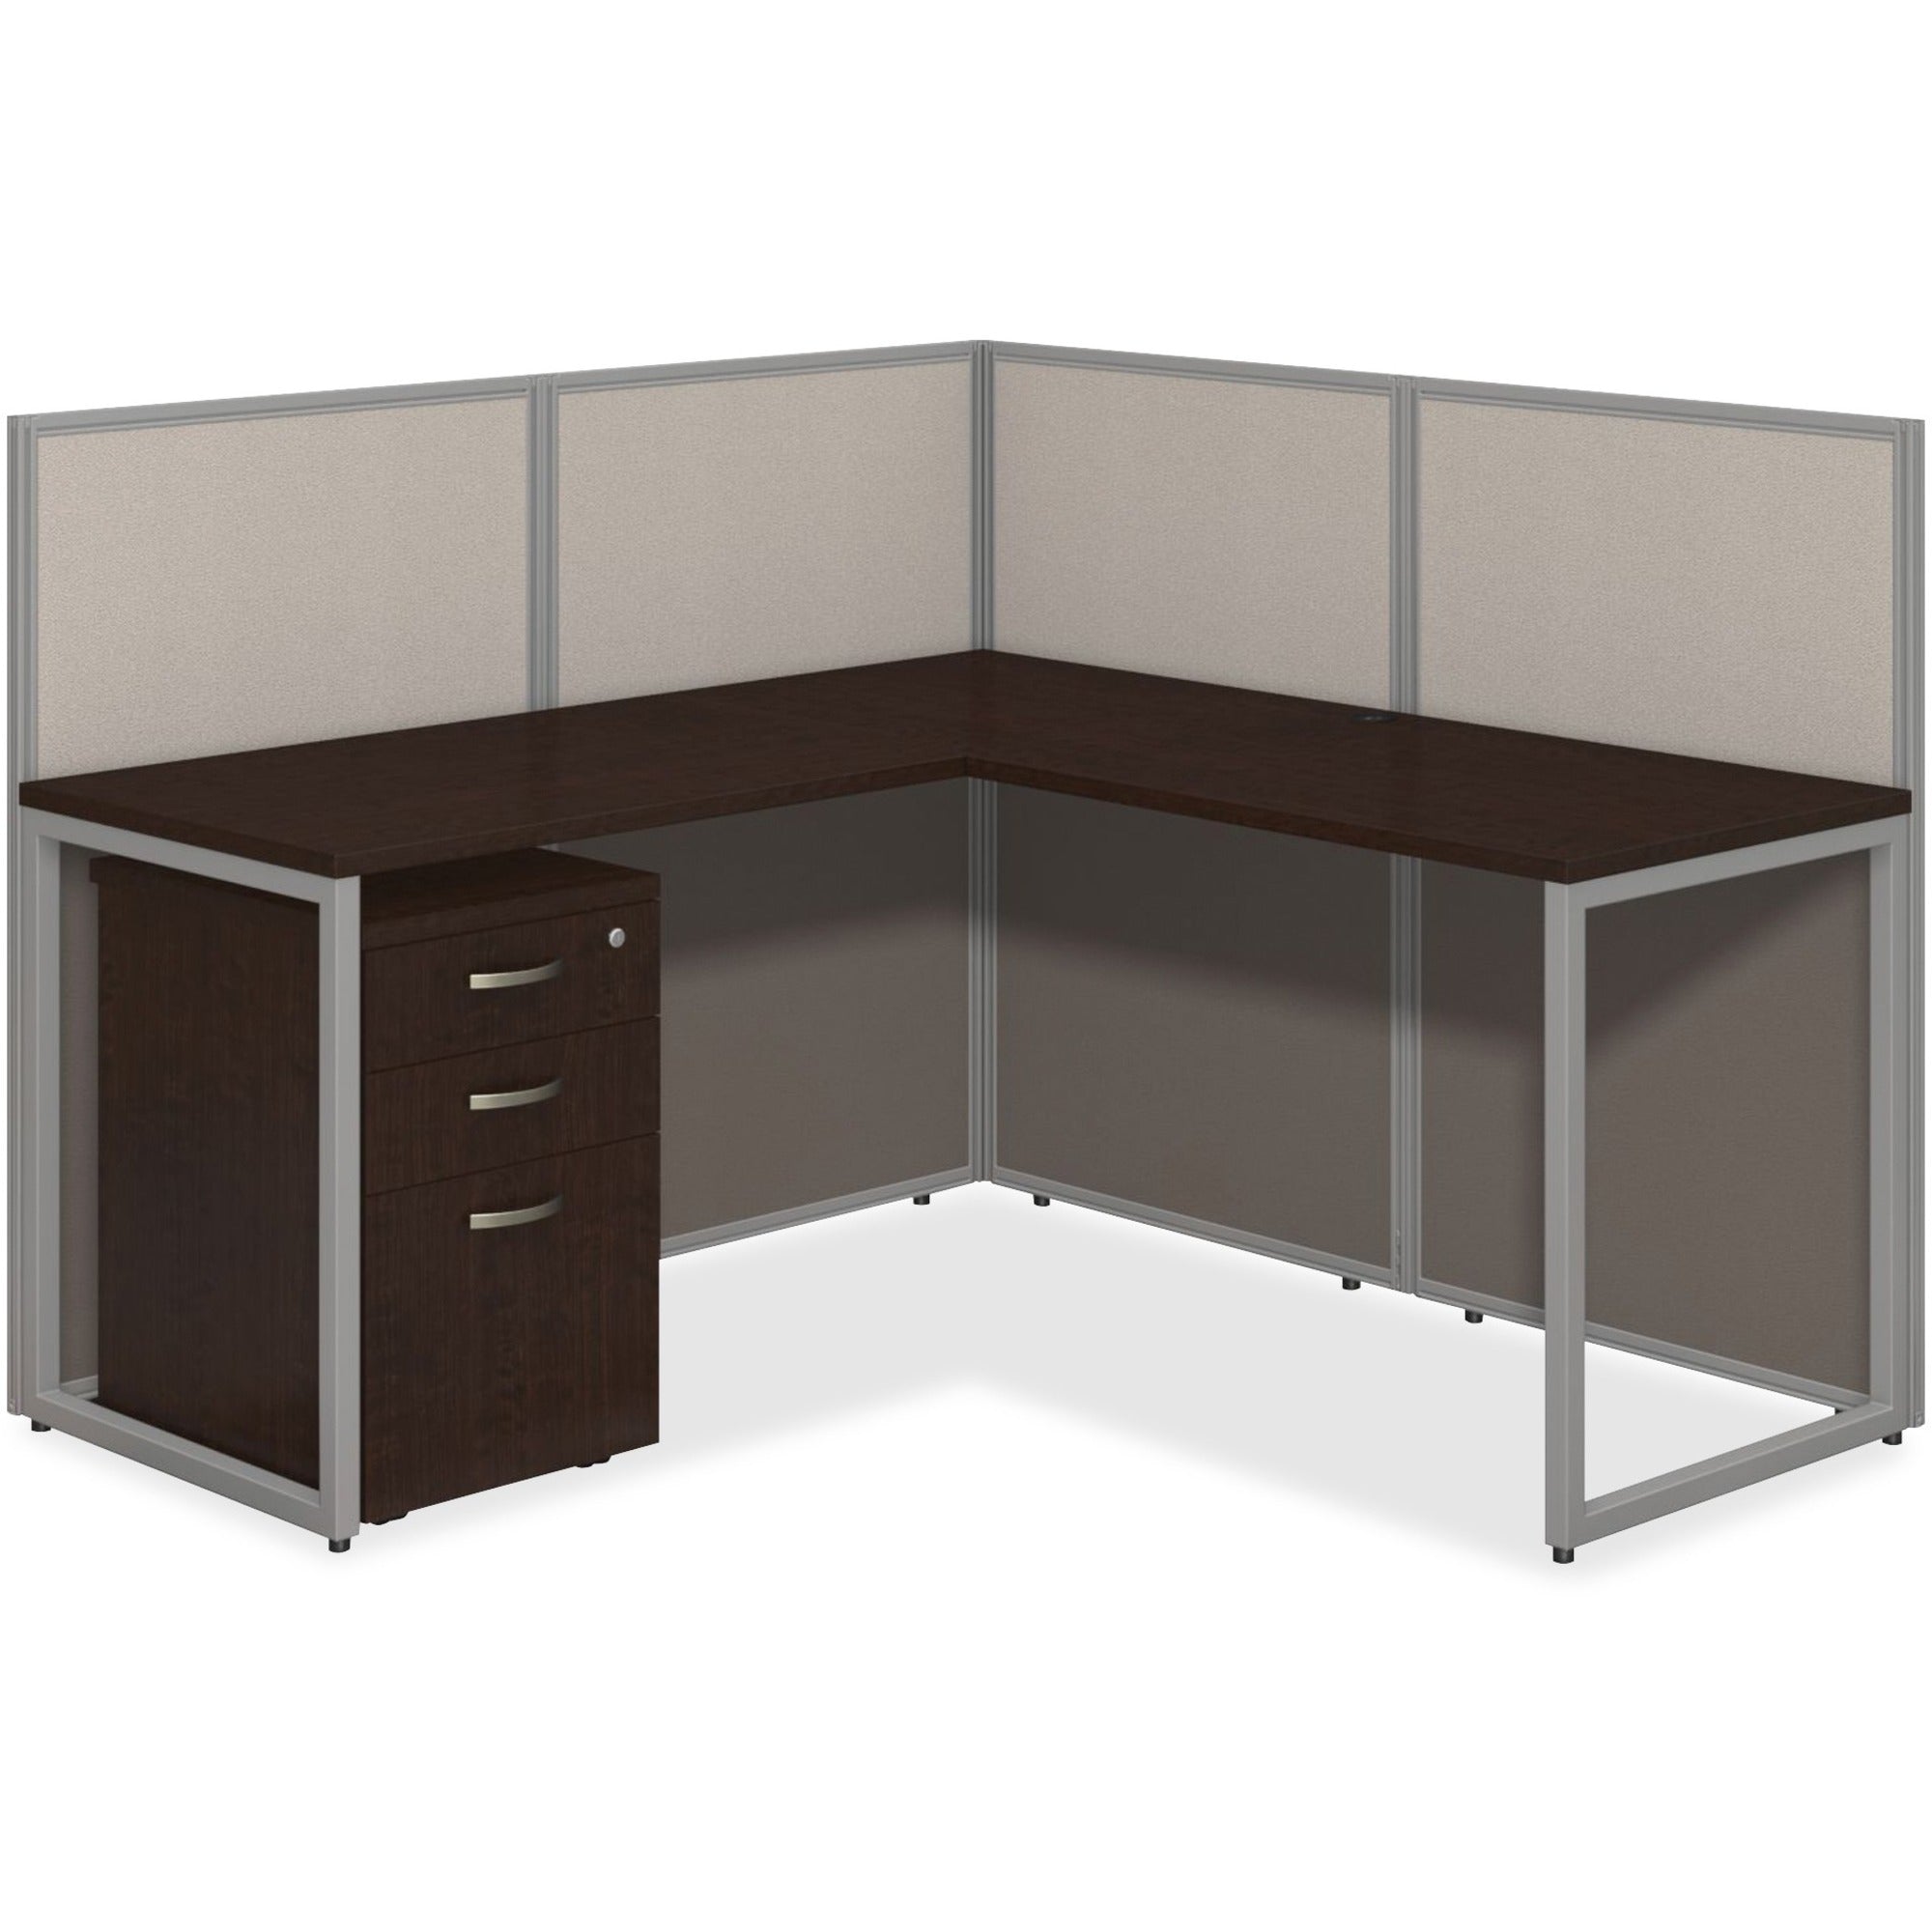 Bush Business Furniture Easy Office 60W L Desk Open Office with 3 Drawer Mobile Pedestal - For - Table TopMocha Cherry L-shaped, Thermofused Laminate (TFL) Top - Pedestal Base - 3 Drawers x 1" Table Top Thickness - 44.88" Height x 60.04" Width x 44.8 - 1